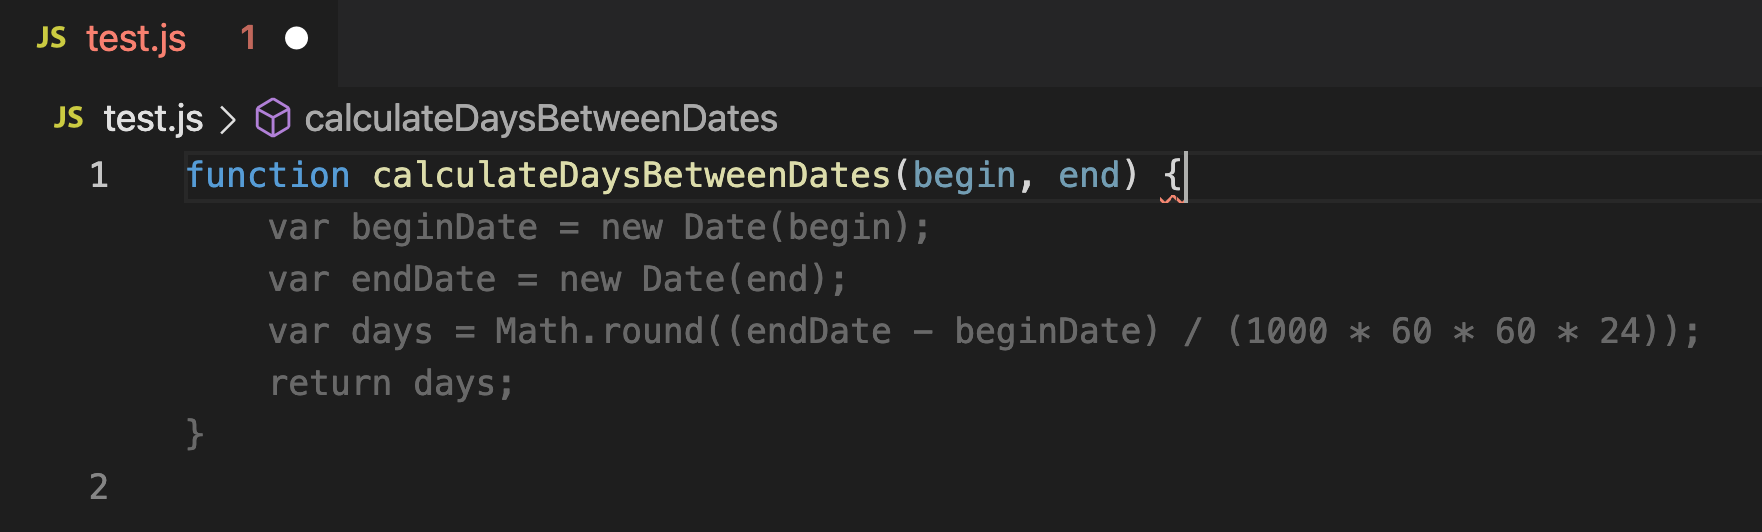 Inline chat suggests the implementation of a 'CalculateDaysBetweenDates' JavaScript function